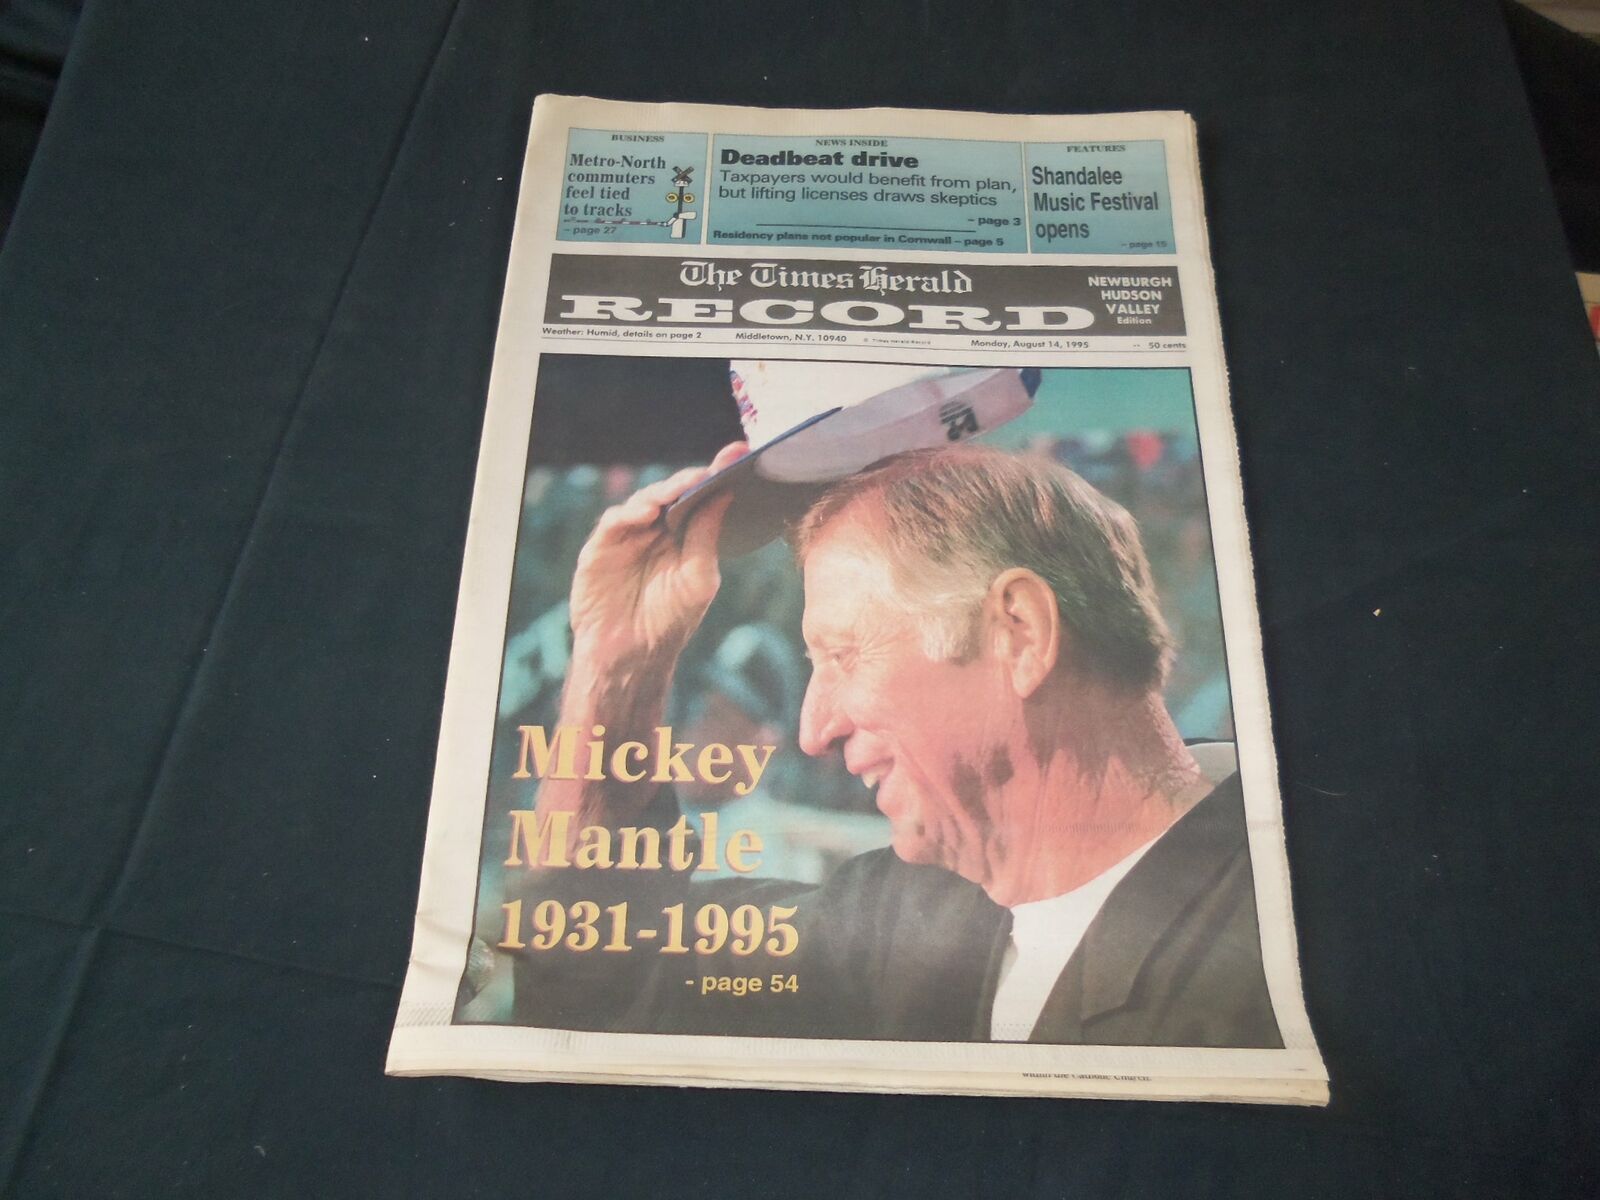 1995 AUGUST 14 TIMES HERALD RECORD NEWSPAPER - MICKEY MANTLE DIED - NP 3504